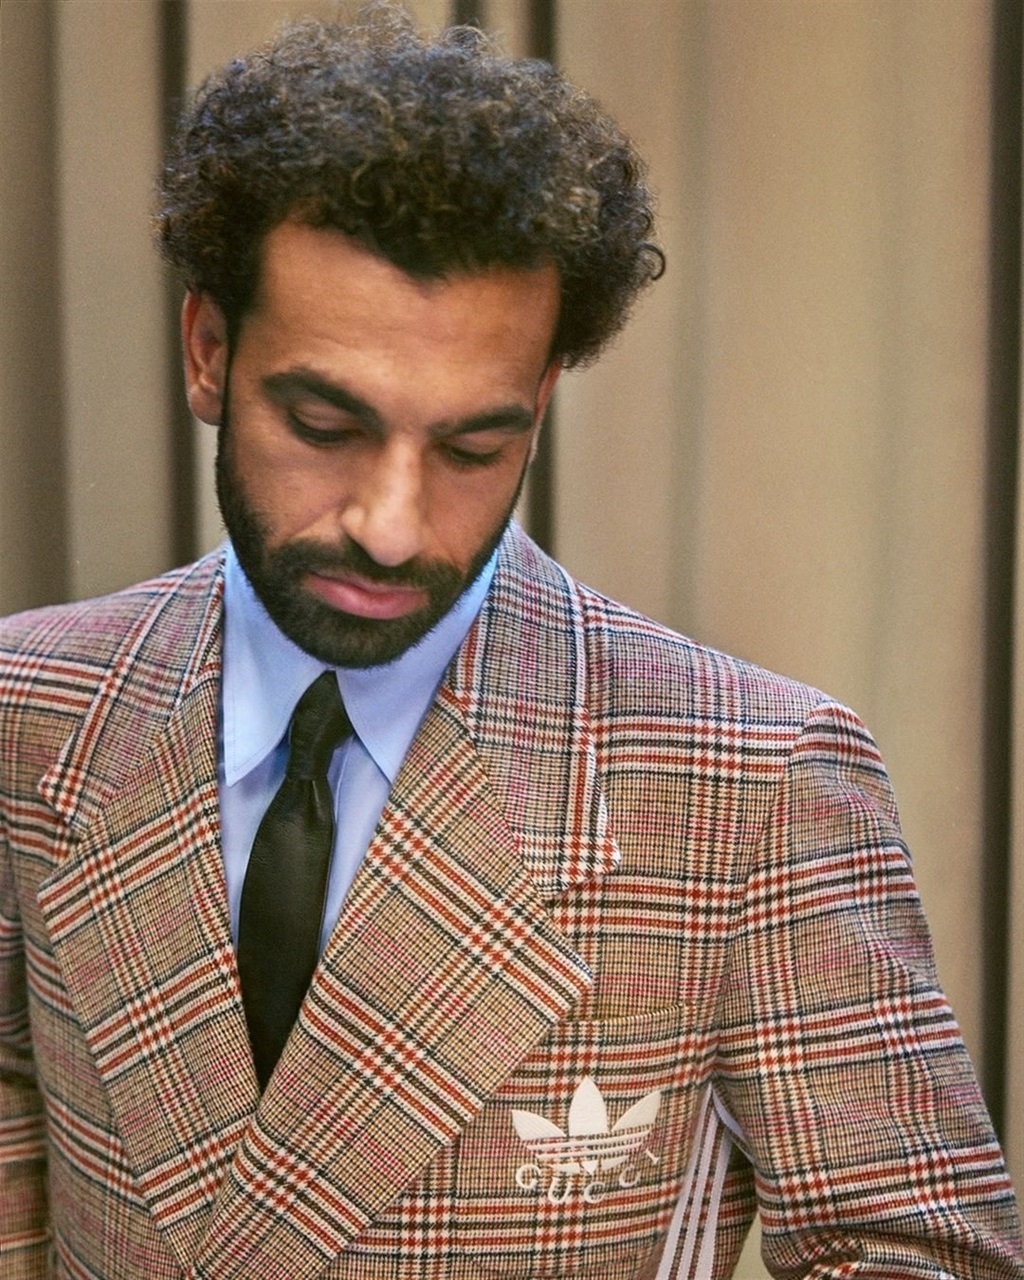 Mo Salah Advertises For Suit Produced By Adidas And Gucci, 44% OFF